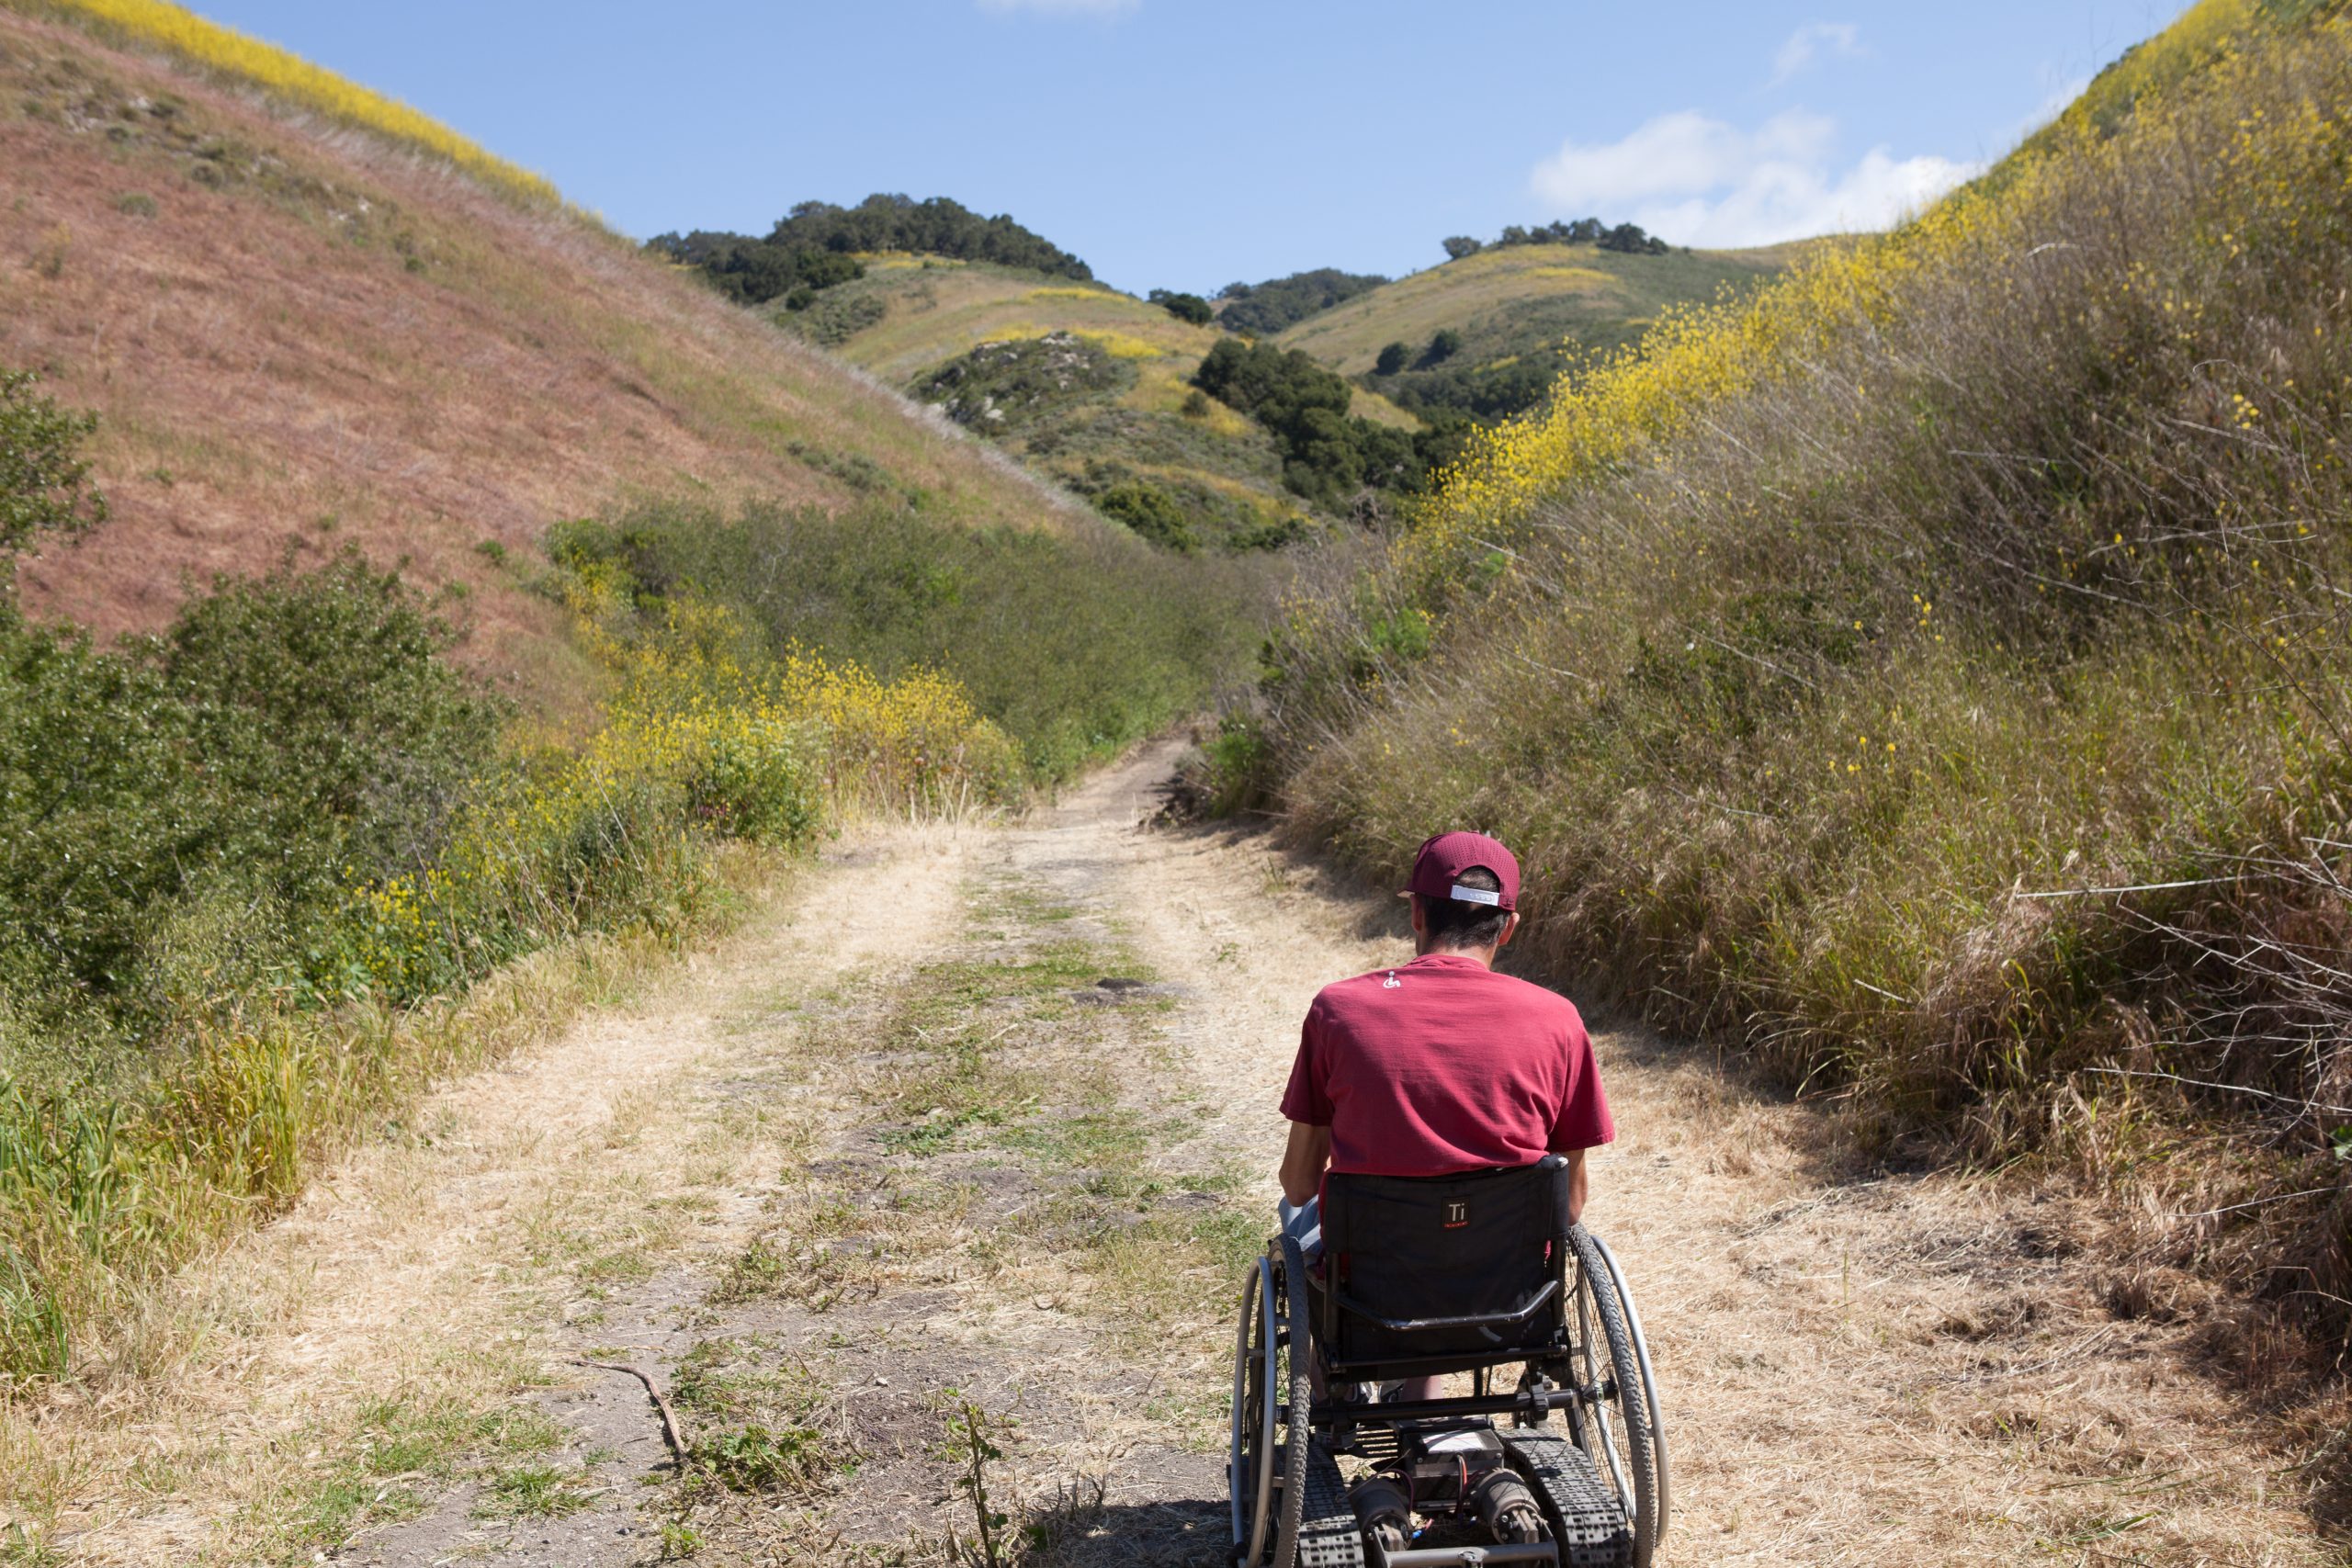 Wheelchair Wednesday at the Pismo Preserve